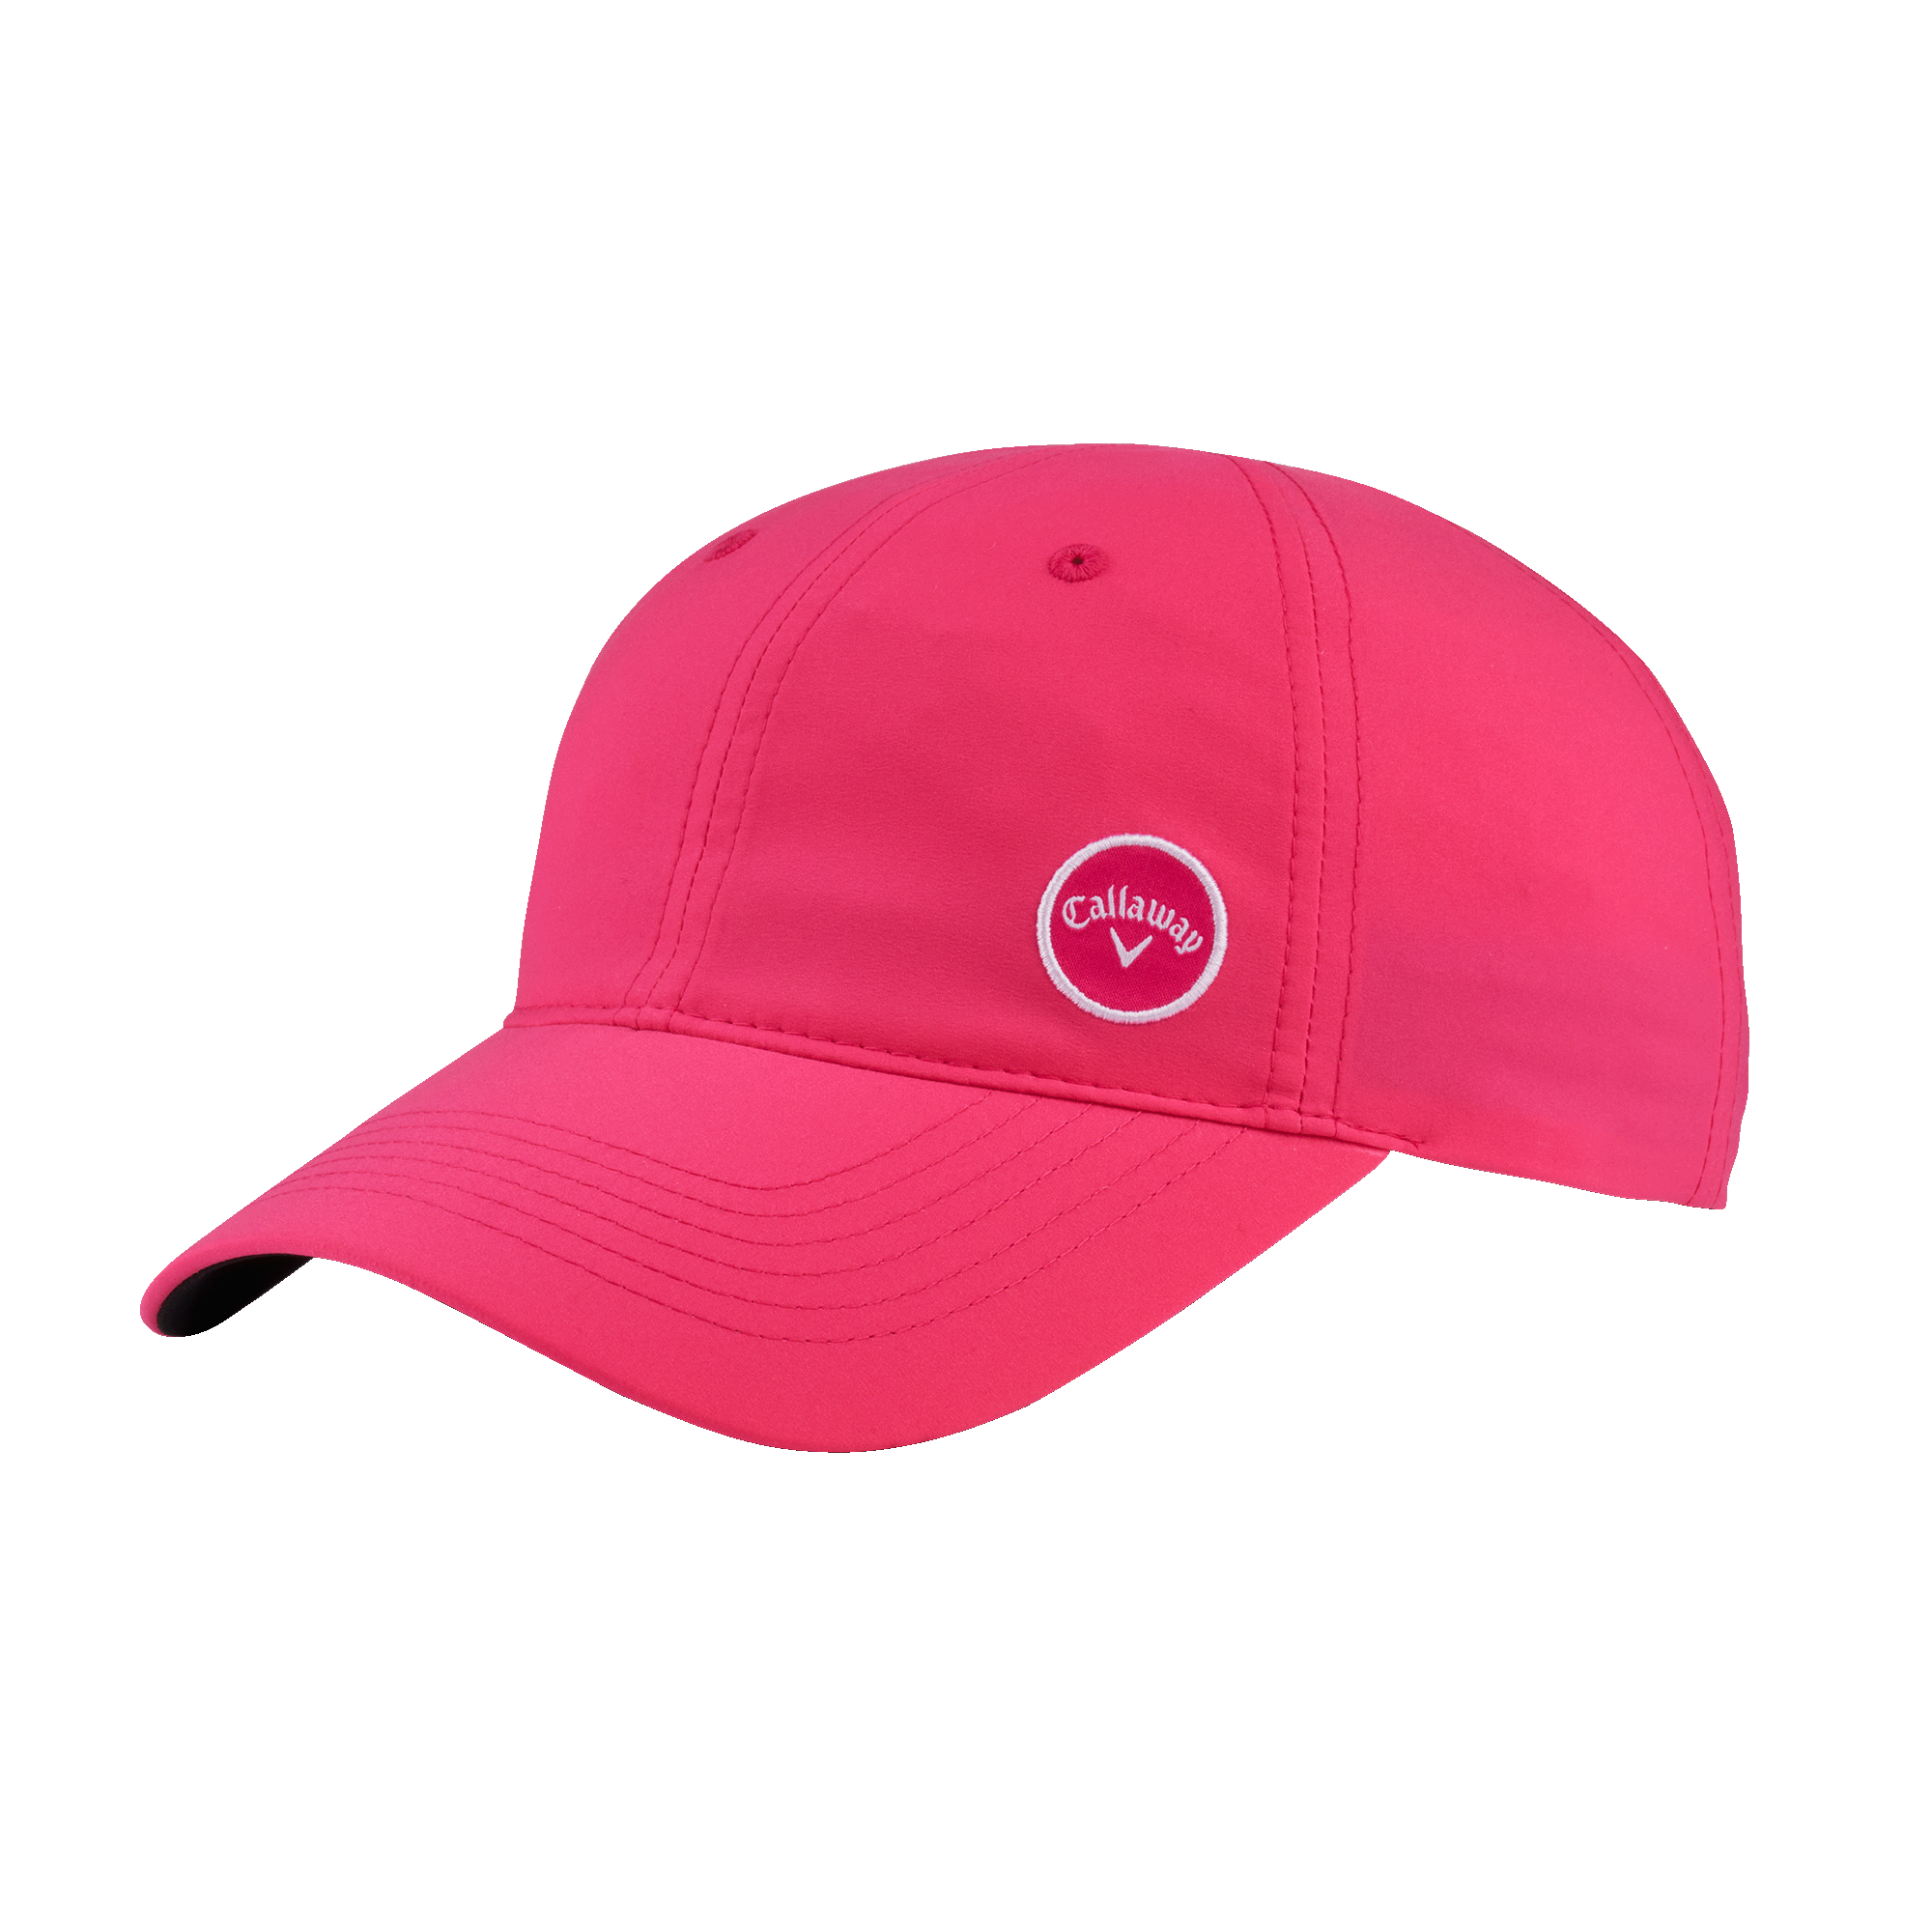 Women's Hiking Hat with Ponytail Hole - Scala Collection Pink / M/L (57-59 cm)